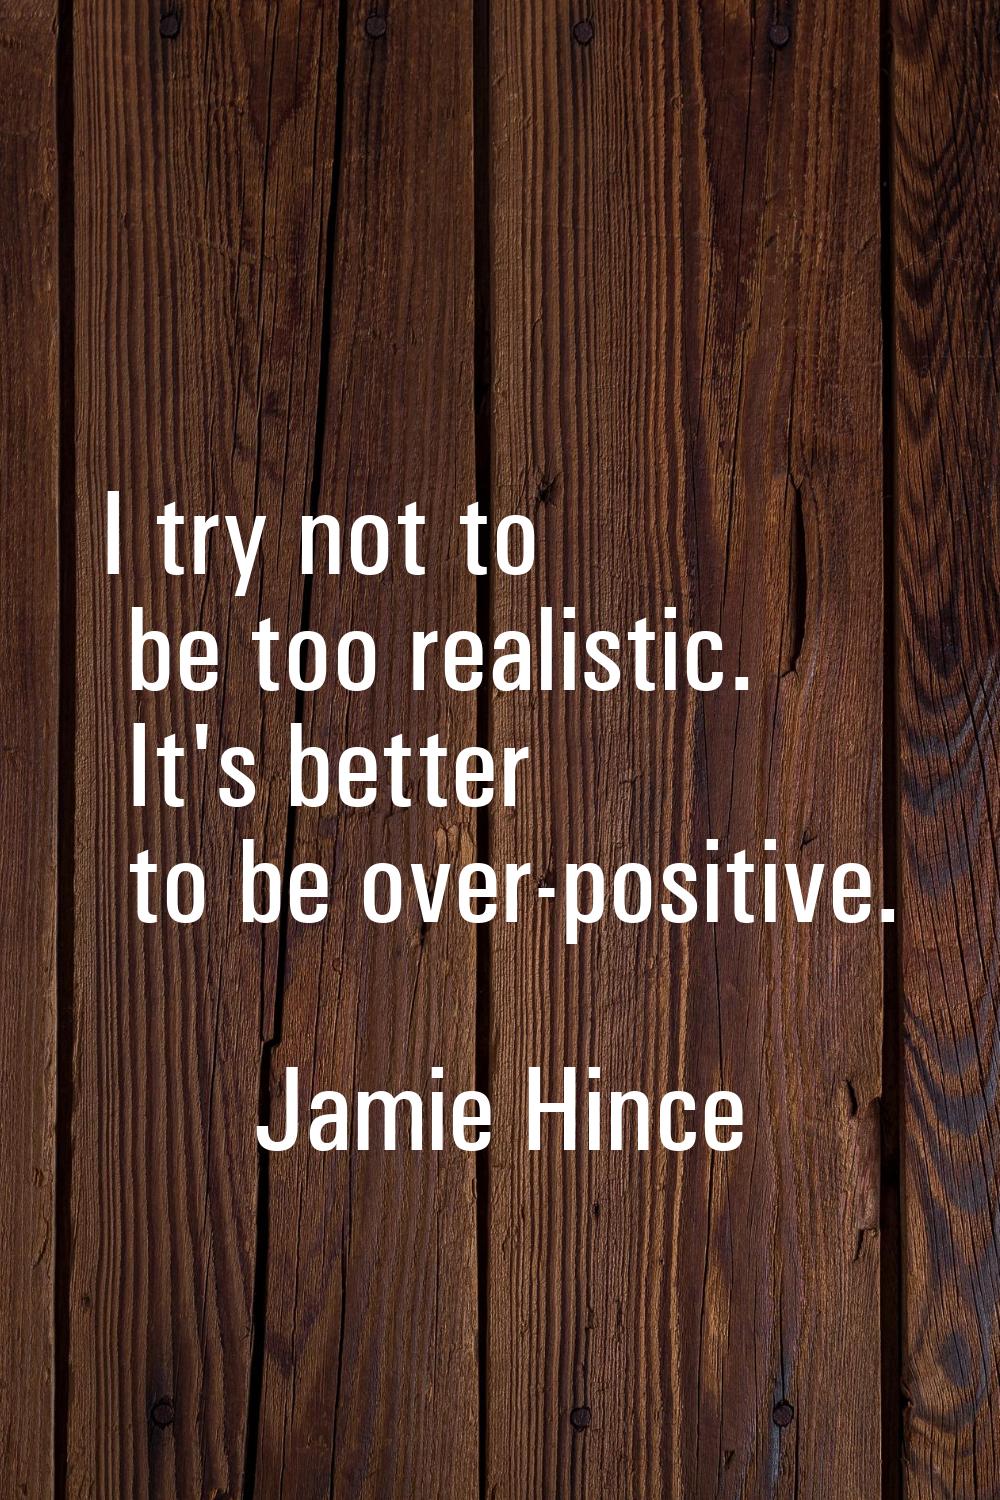 I try not to be too realistic. It's better to be over-positive.